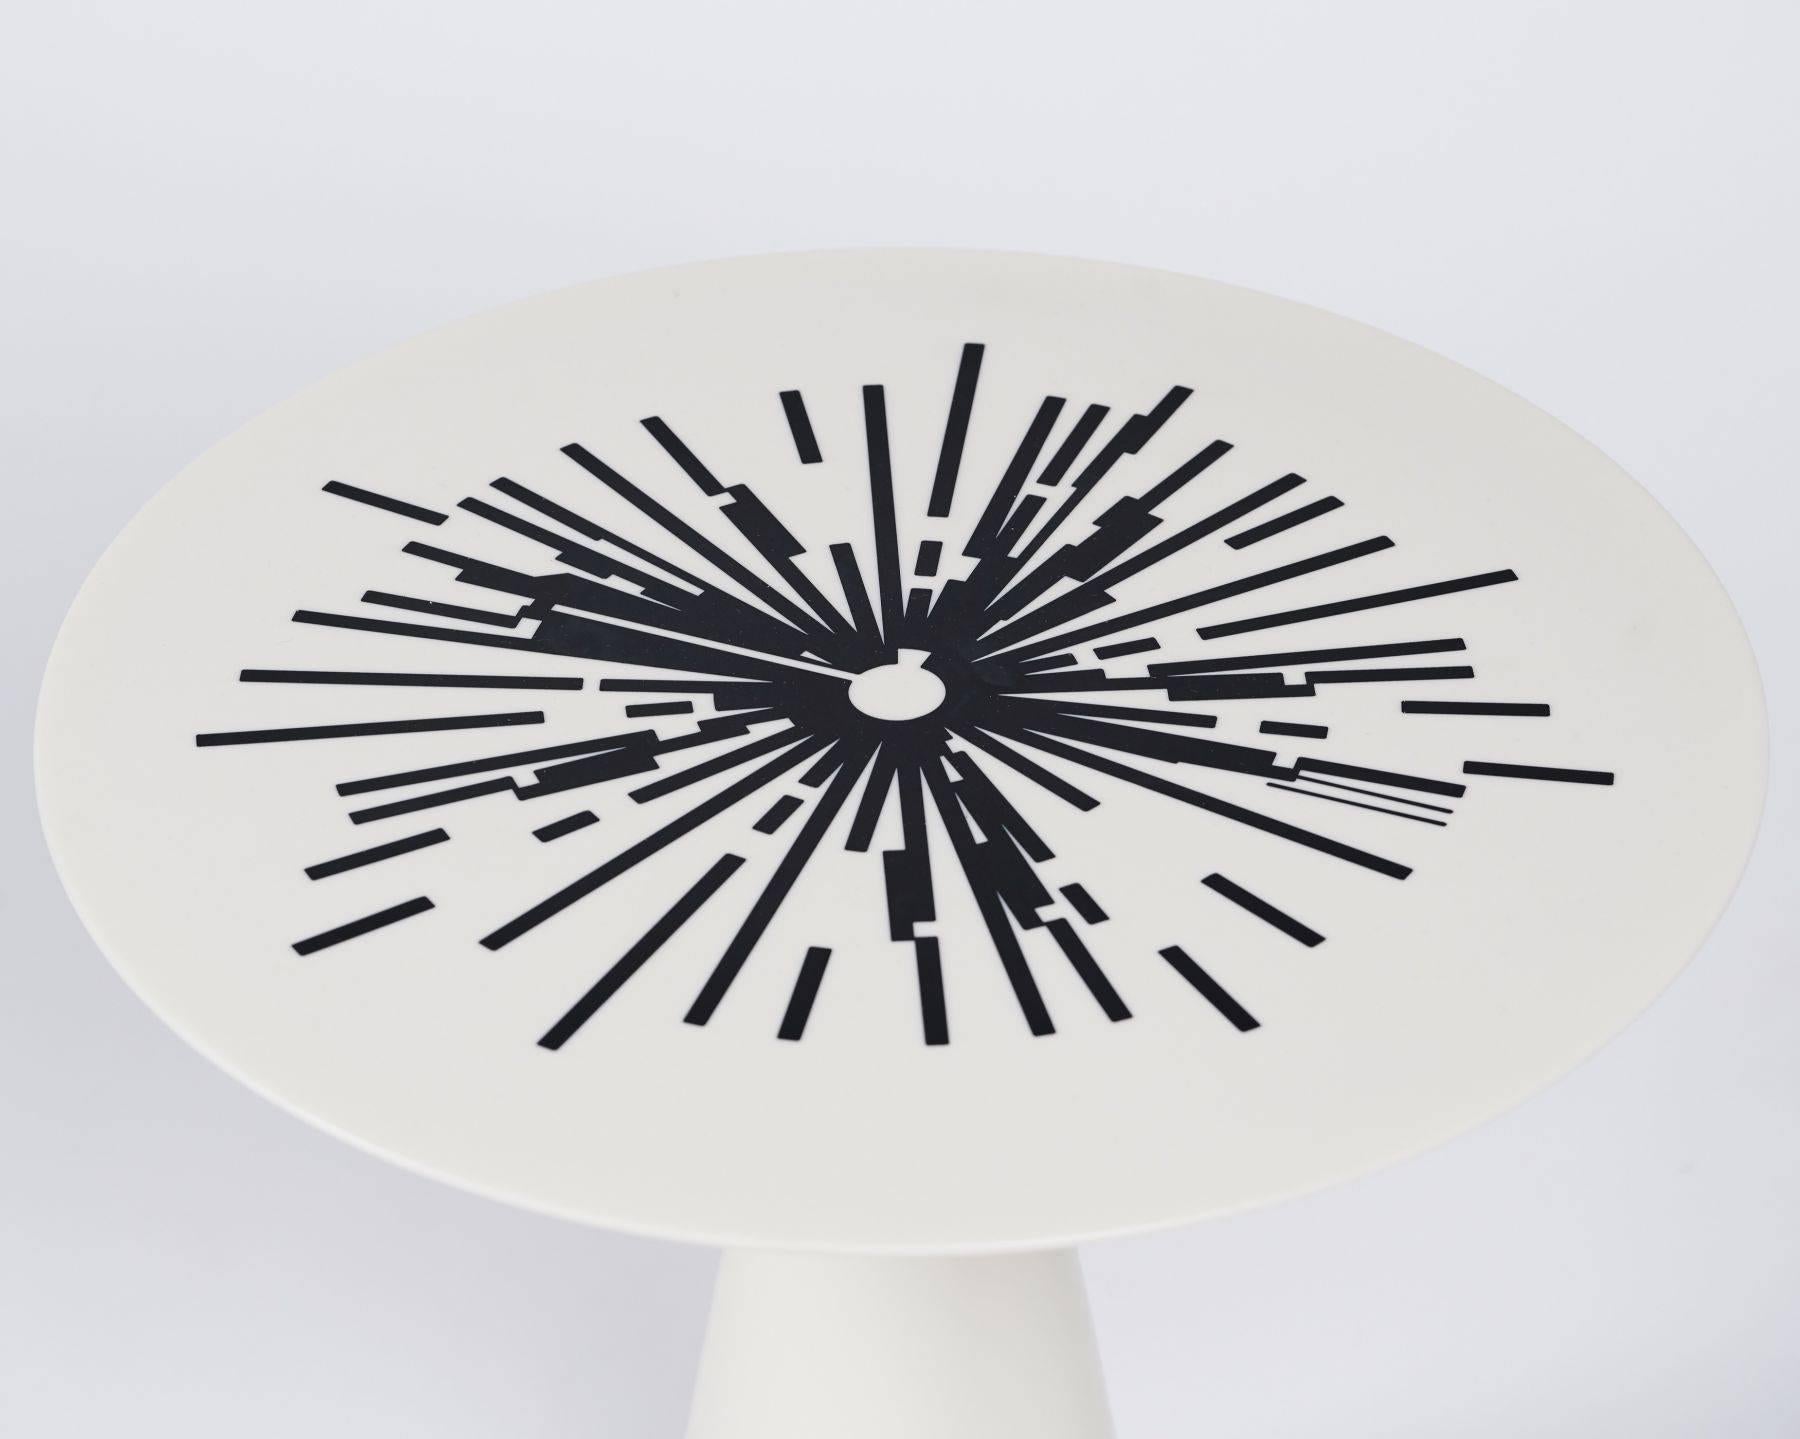 This one of a  set of nesting occasional tables, made of a silky smooth, laminated Corian, plays with the contrast of night with day, of light with darkness. The pieces are entirely black and white and adorned with intricate, laser cut and bronze